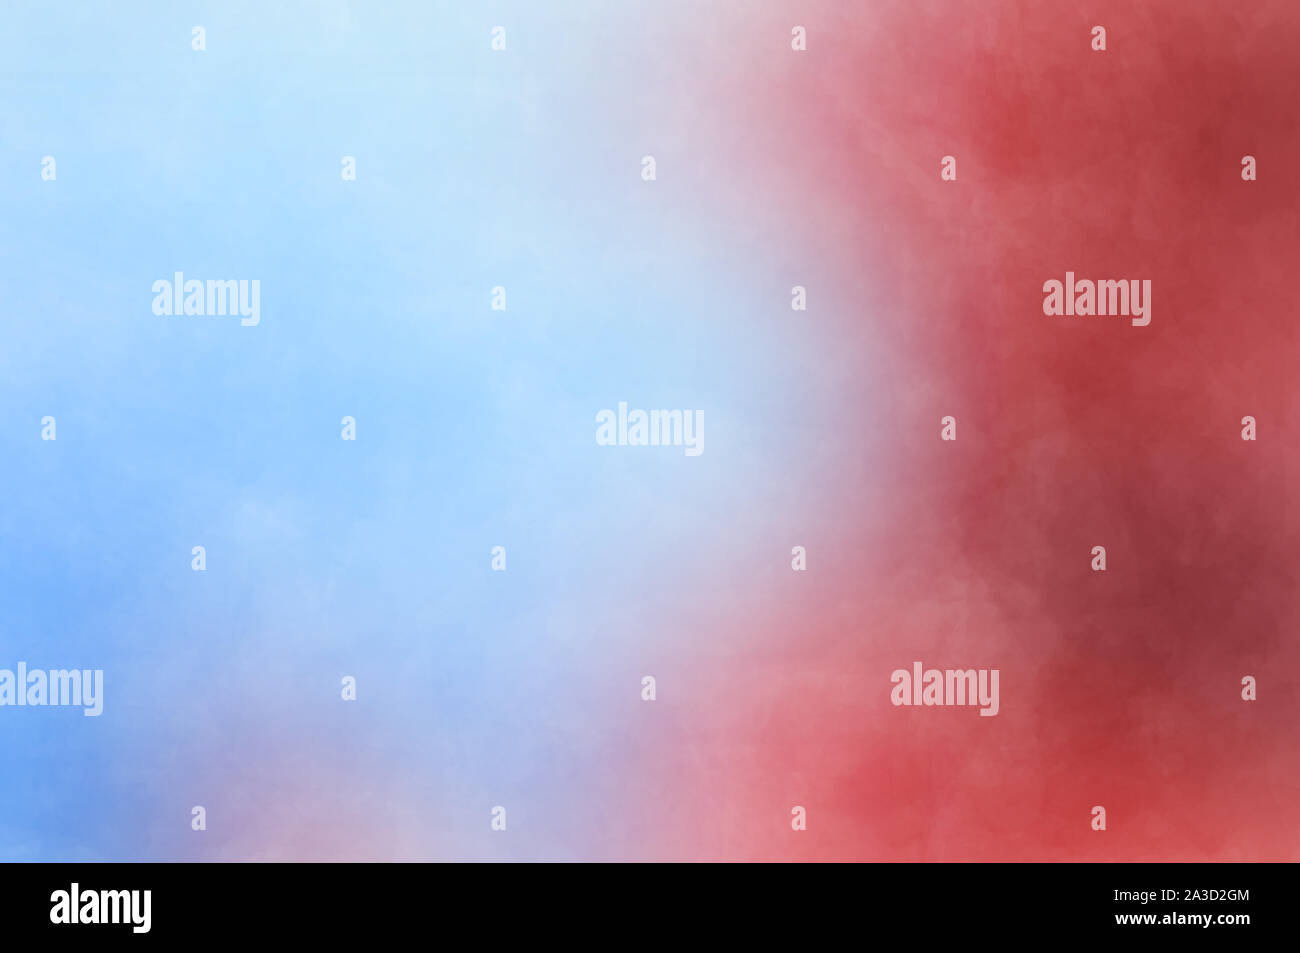 Bright red and blue abstract artsy watercolor background blurred light subtle grunge art wallpaper texture with cloud fog or smoke pattern Stock Photo